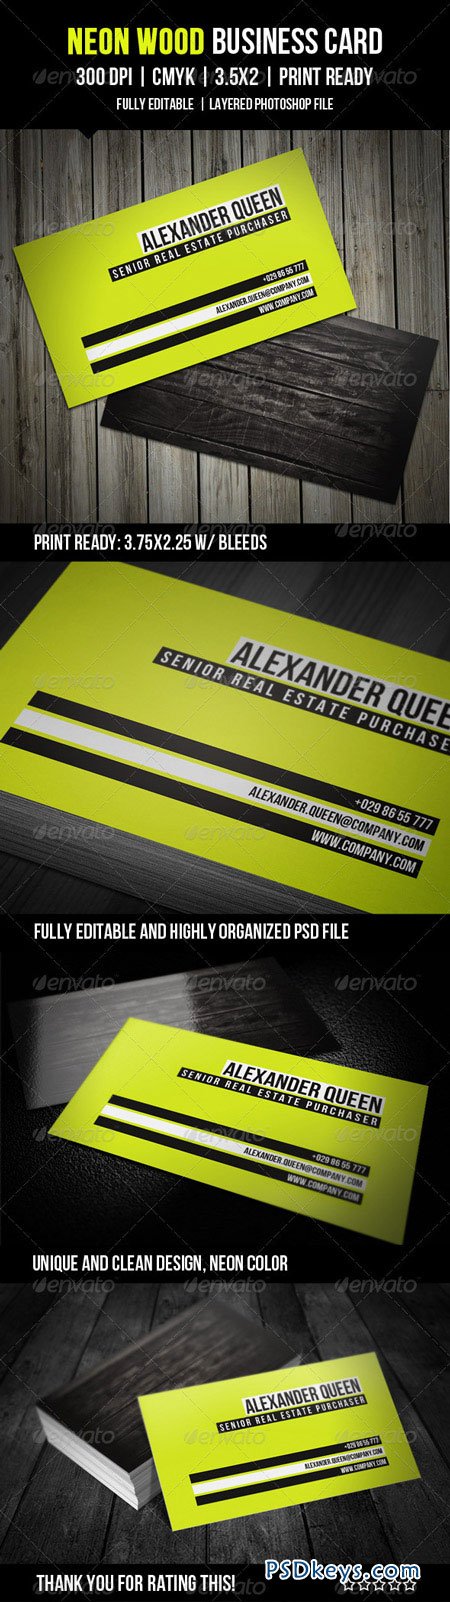 Neon Wood Business Card 2770633